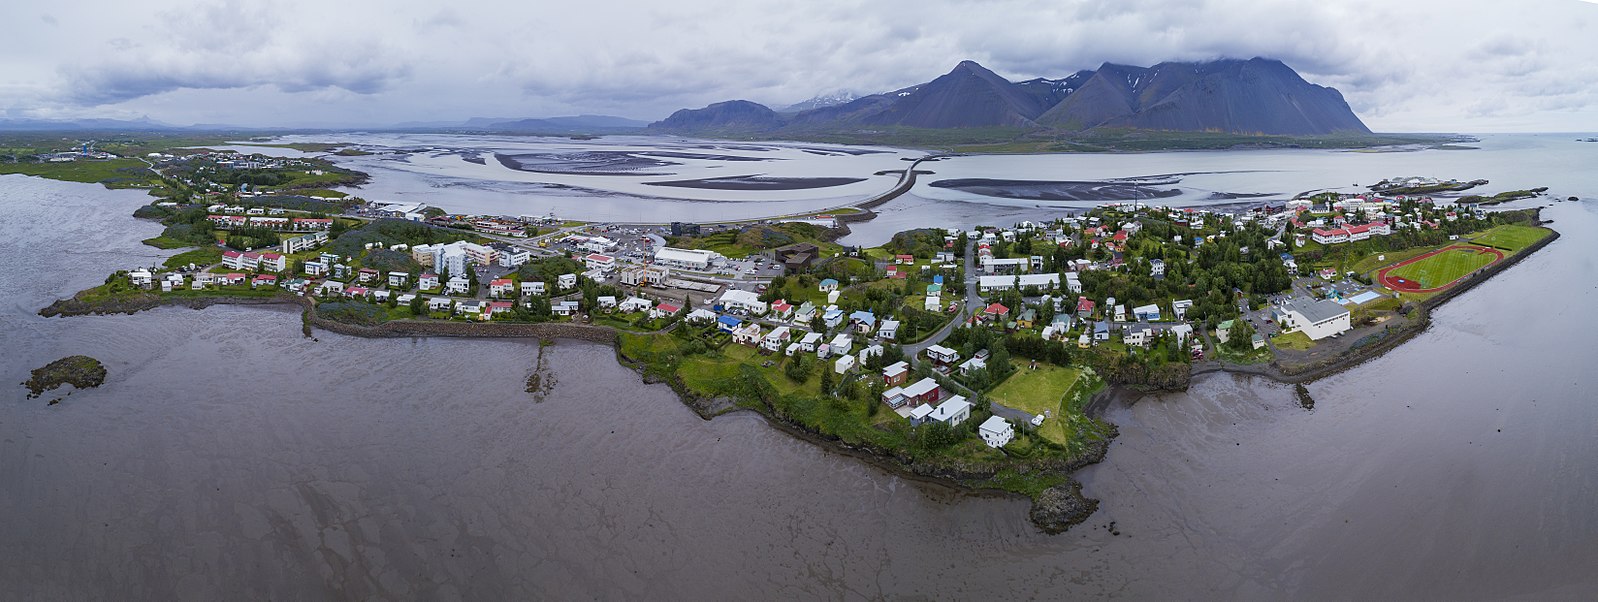 The Settlement Center is in the town of Borgarnes in West Iceland.